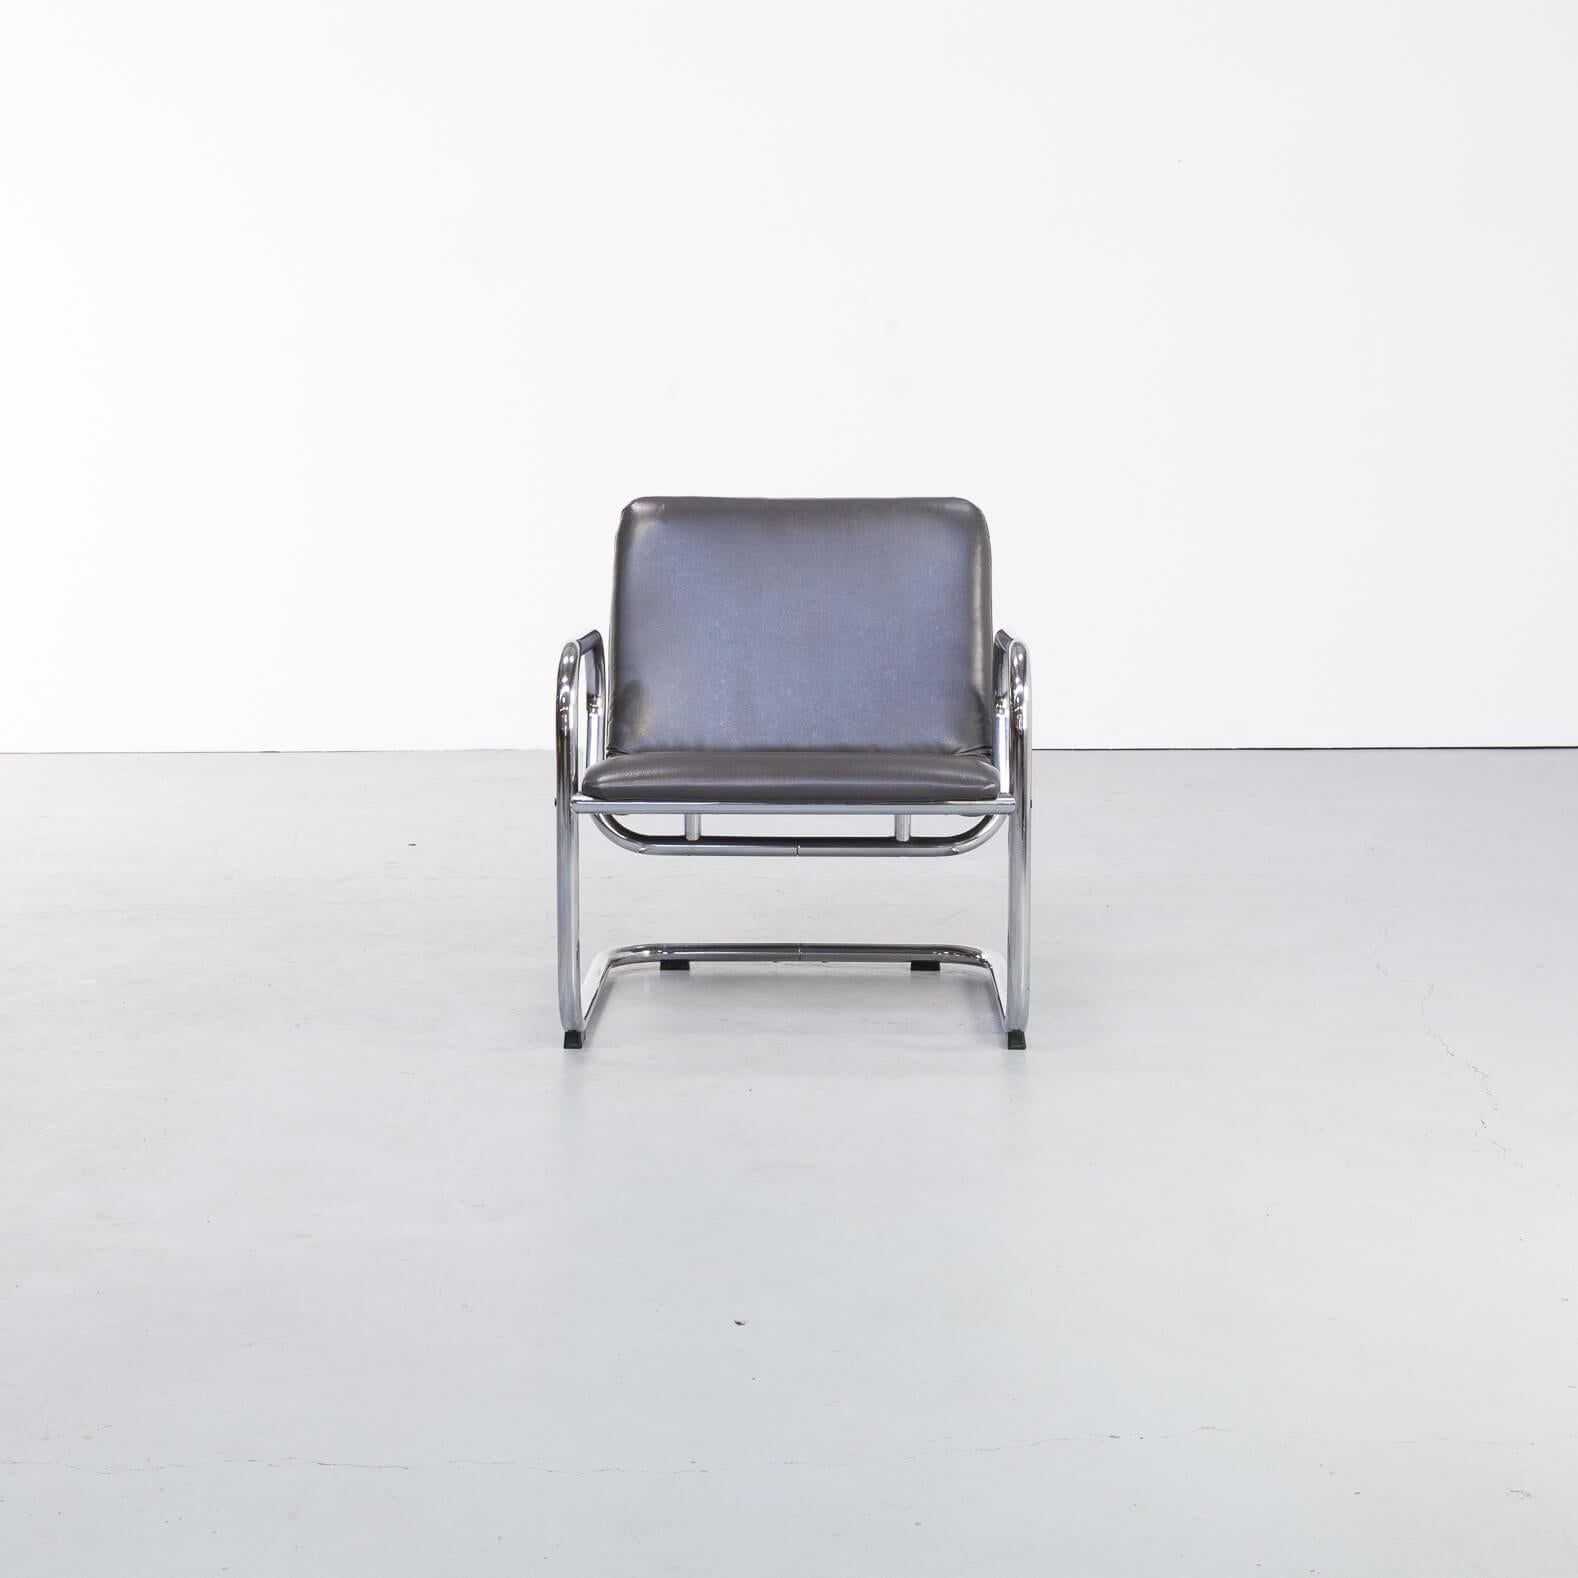 One of the main issues of the in germany founded Bauhaus style it that designer names are less important than the product they designed. It is very recognisable by the usage of tubular steel. This fauteuil is covered with grey leather seating and